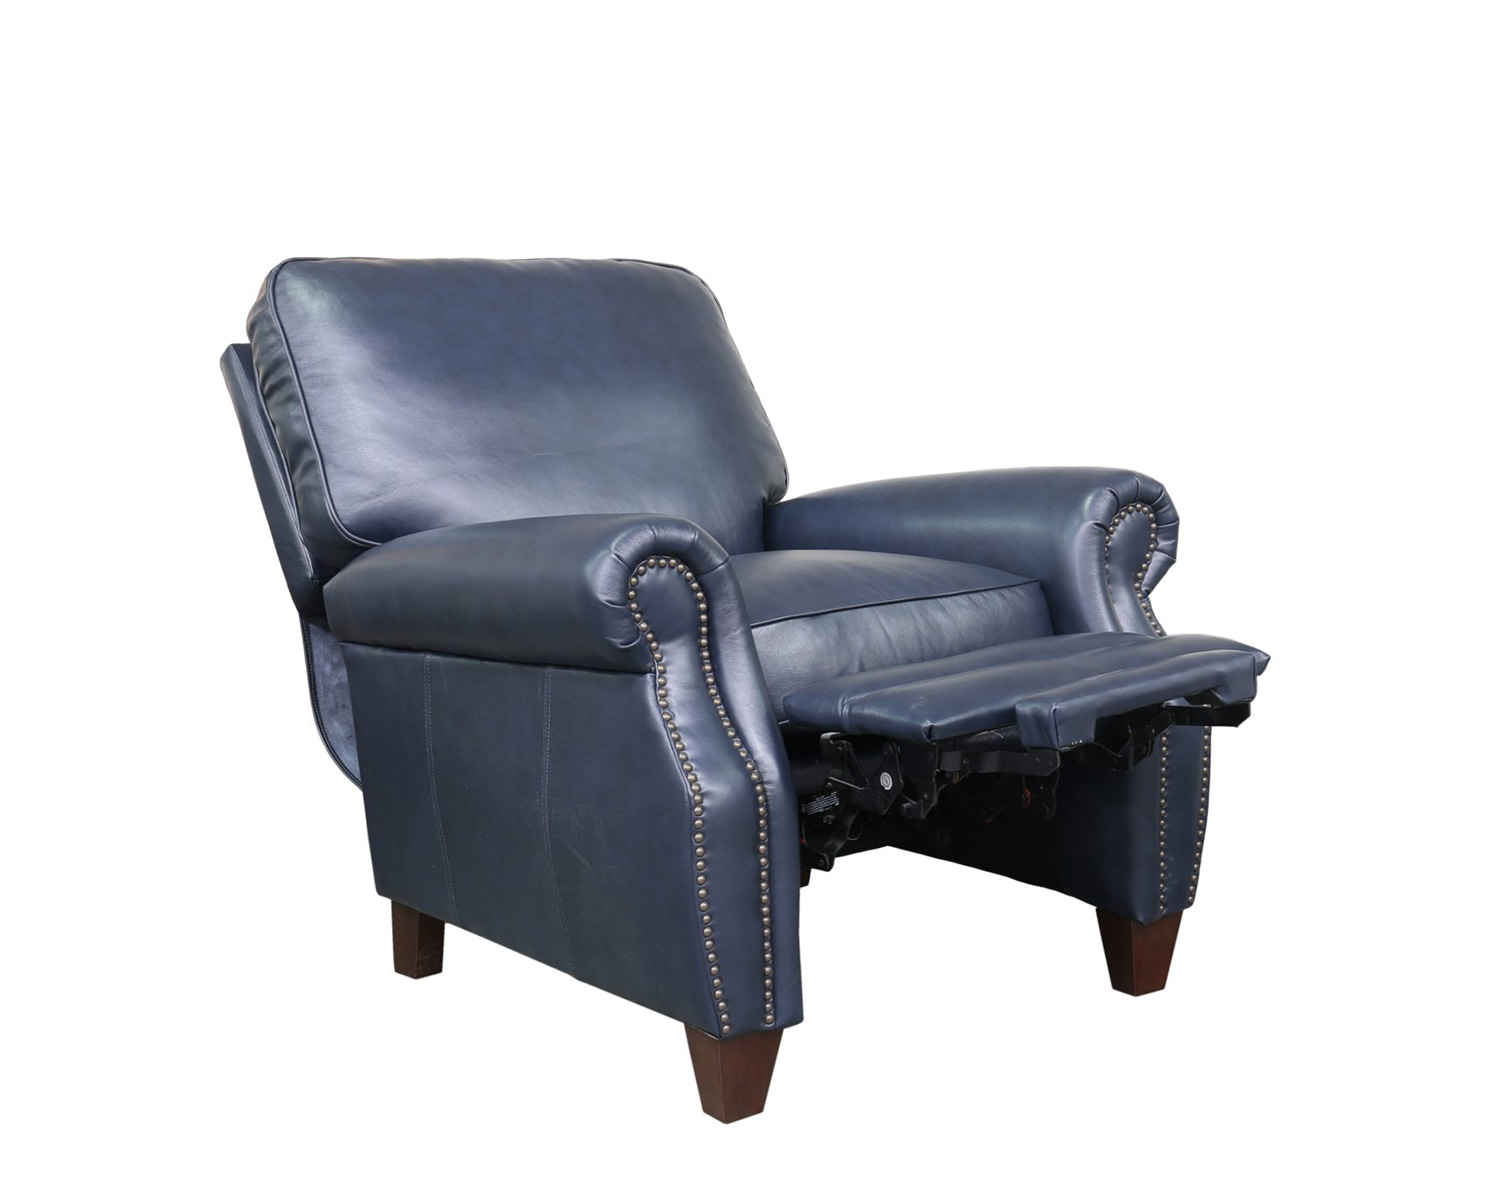 Barcalounger Briarwood Recliner Chair - Shoreham Blue/all leather